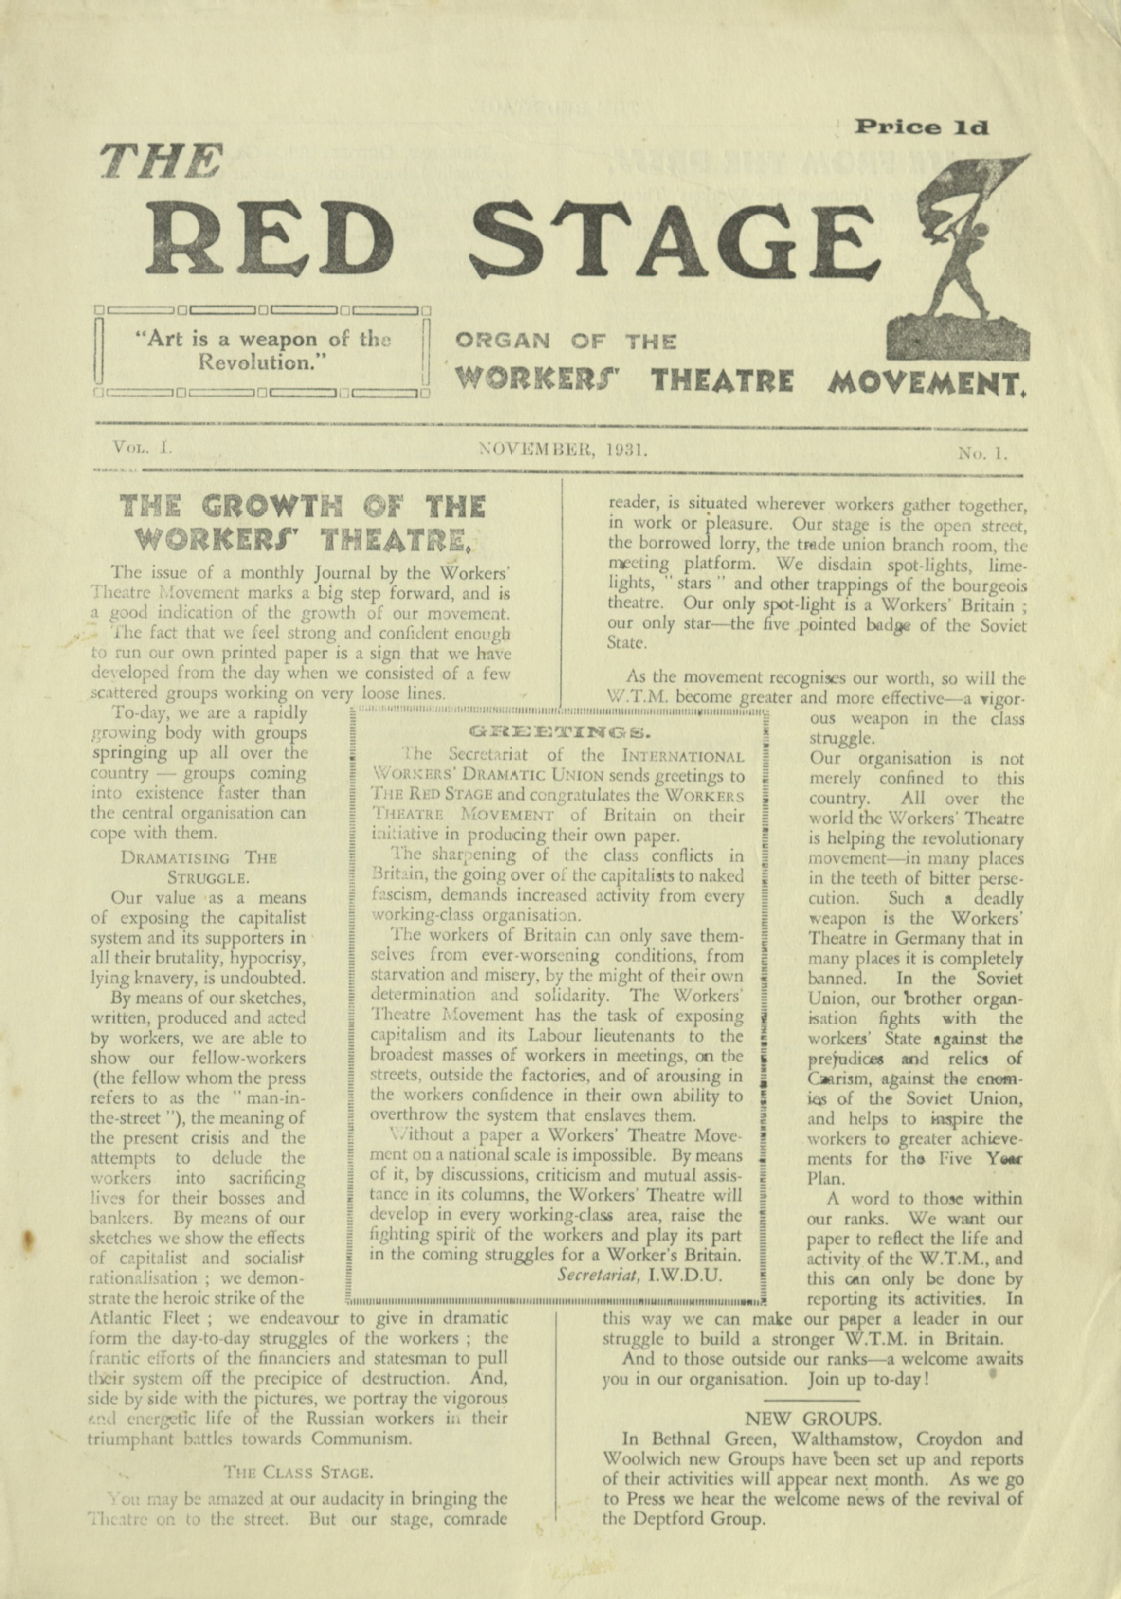 The Red Stage, vol.1, no.1